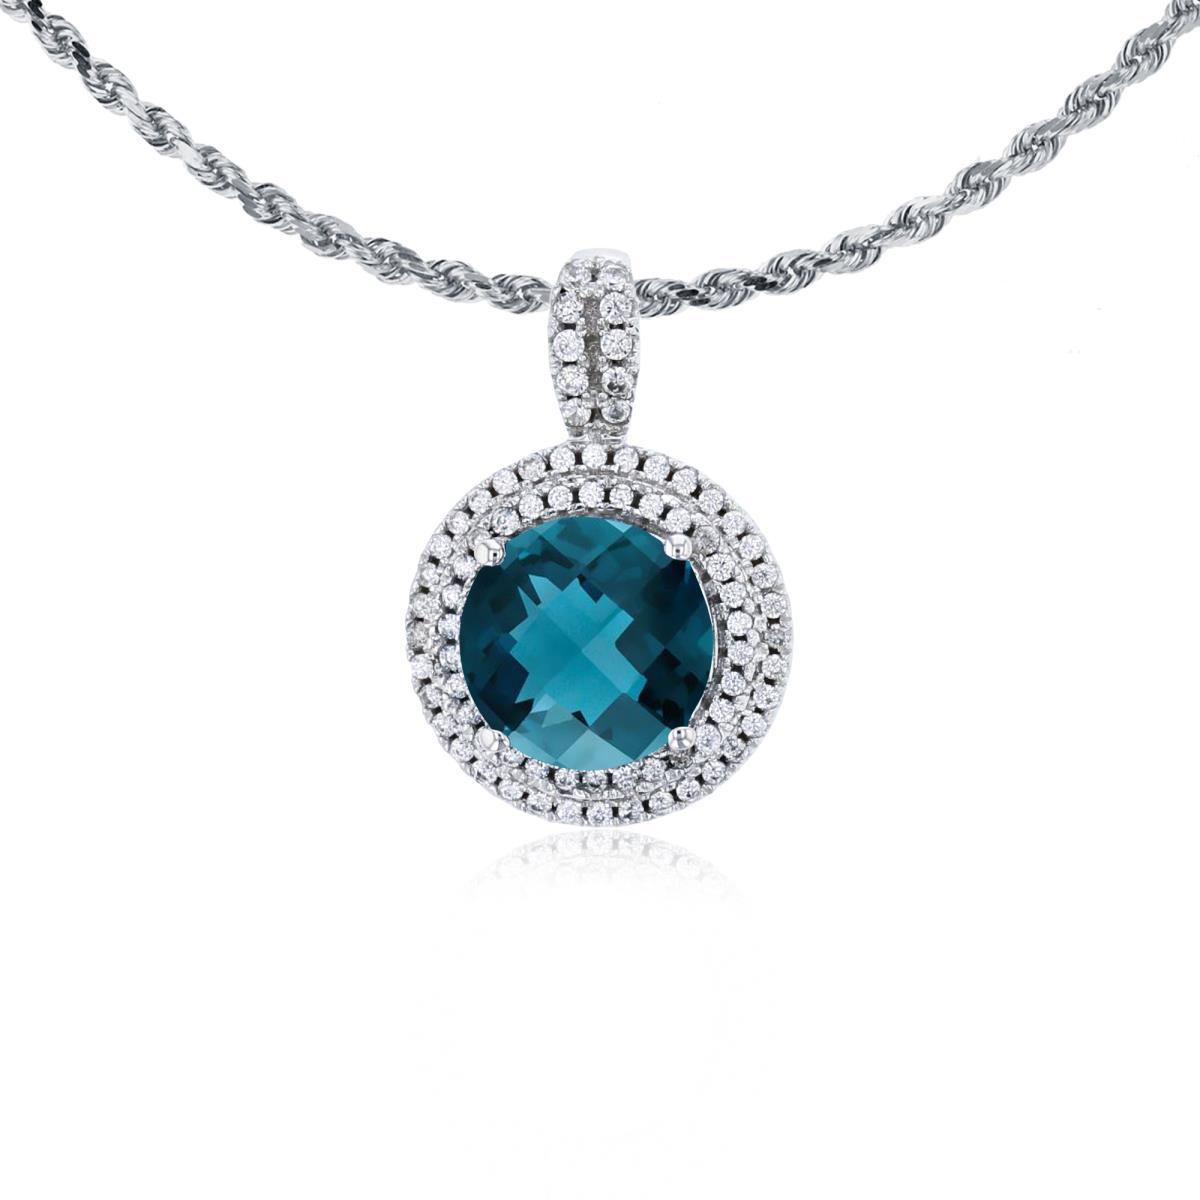 10K White Gold 7mm Round London Blue Topaz & 0.25 CTTW Diamonds Double Halo 18" Rope Chain Necklace